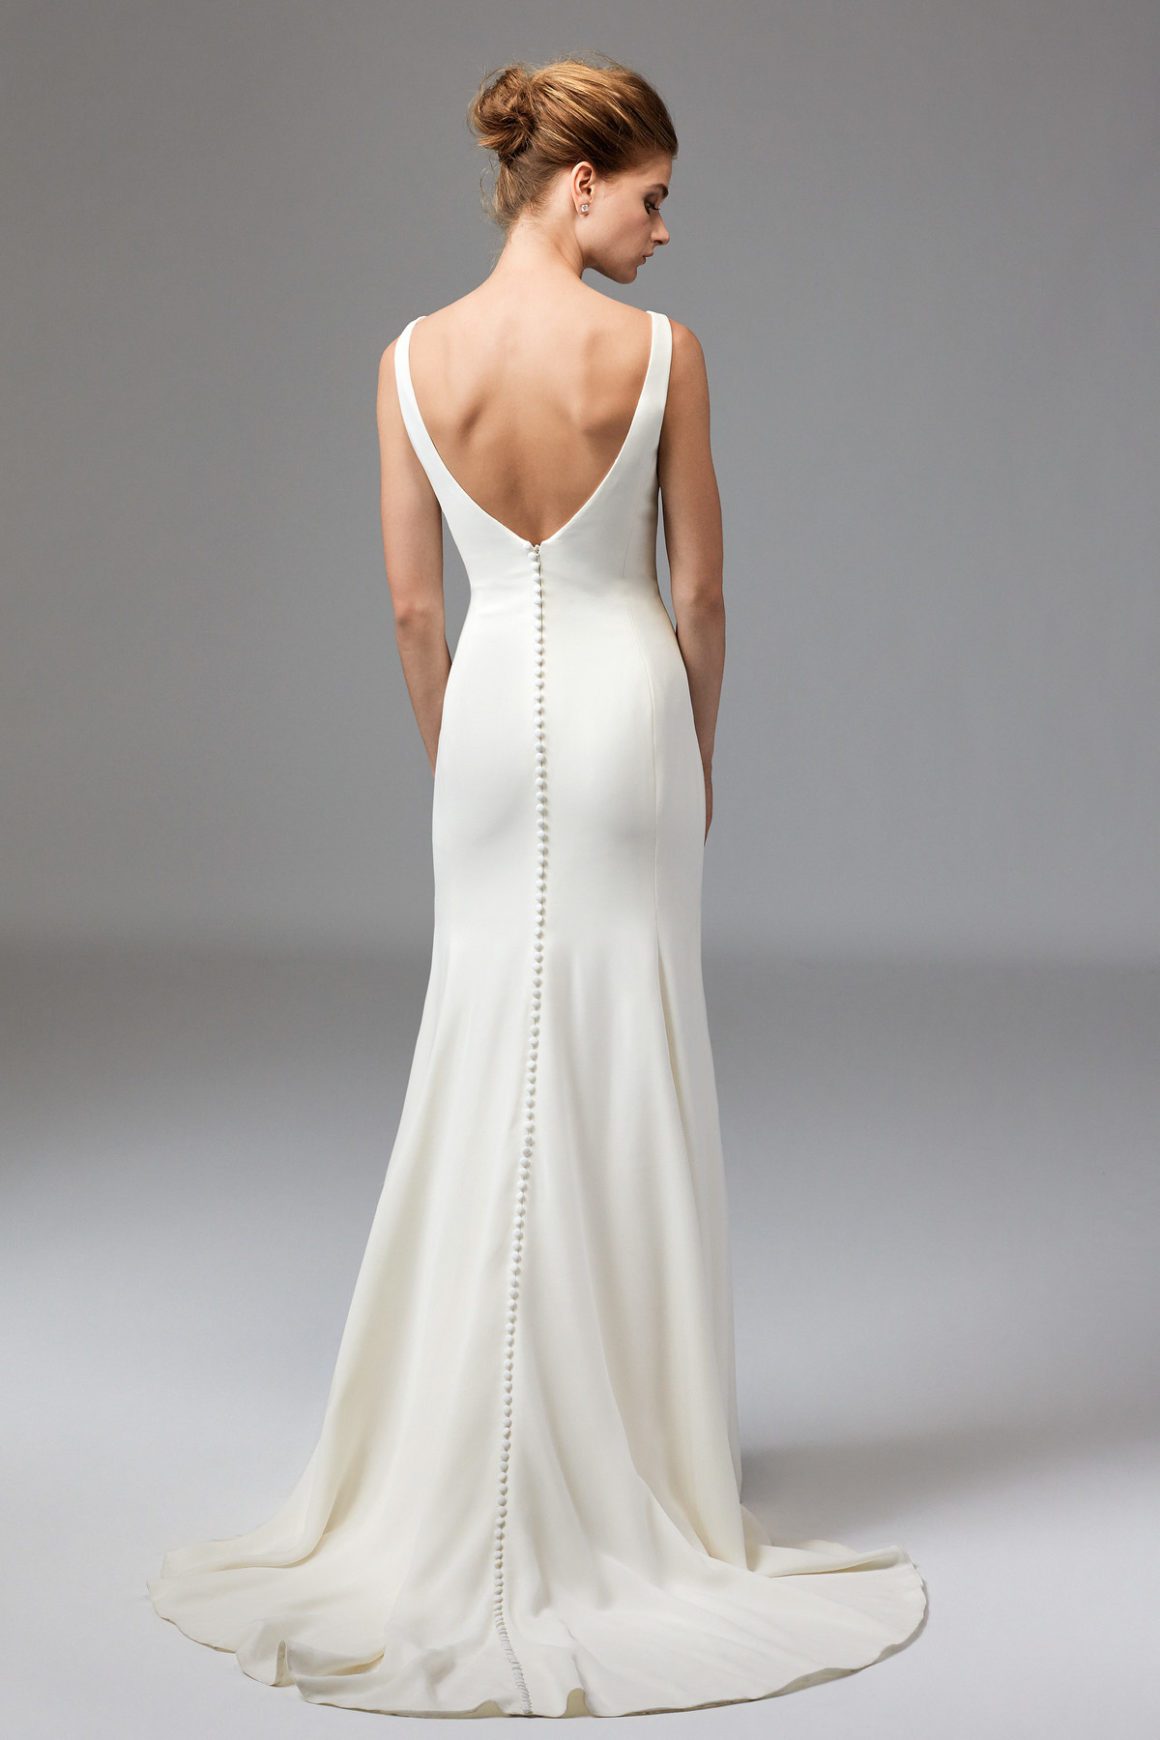 Watters Gown Collection, Wedding Dress Designer | Archive Bridal